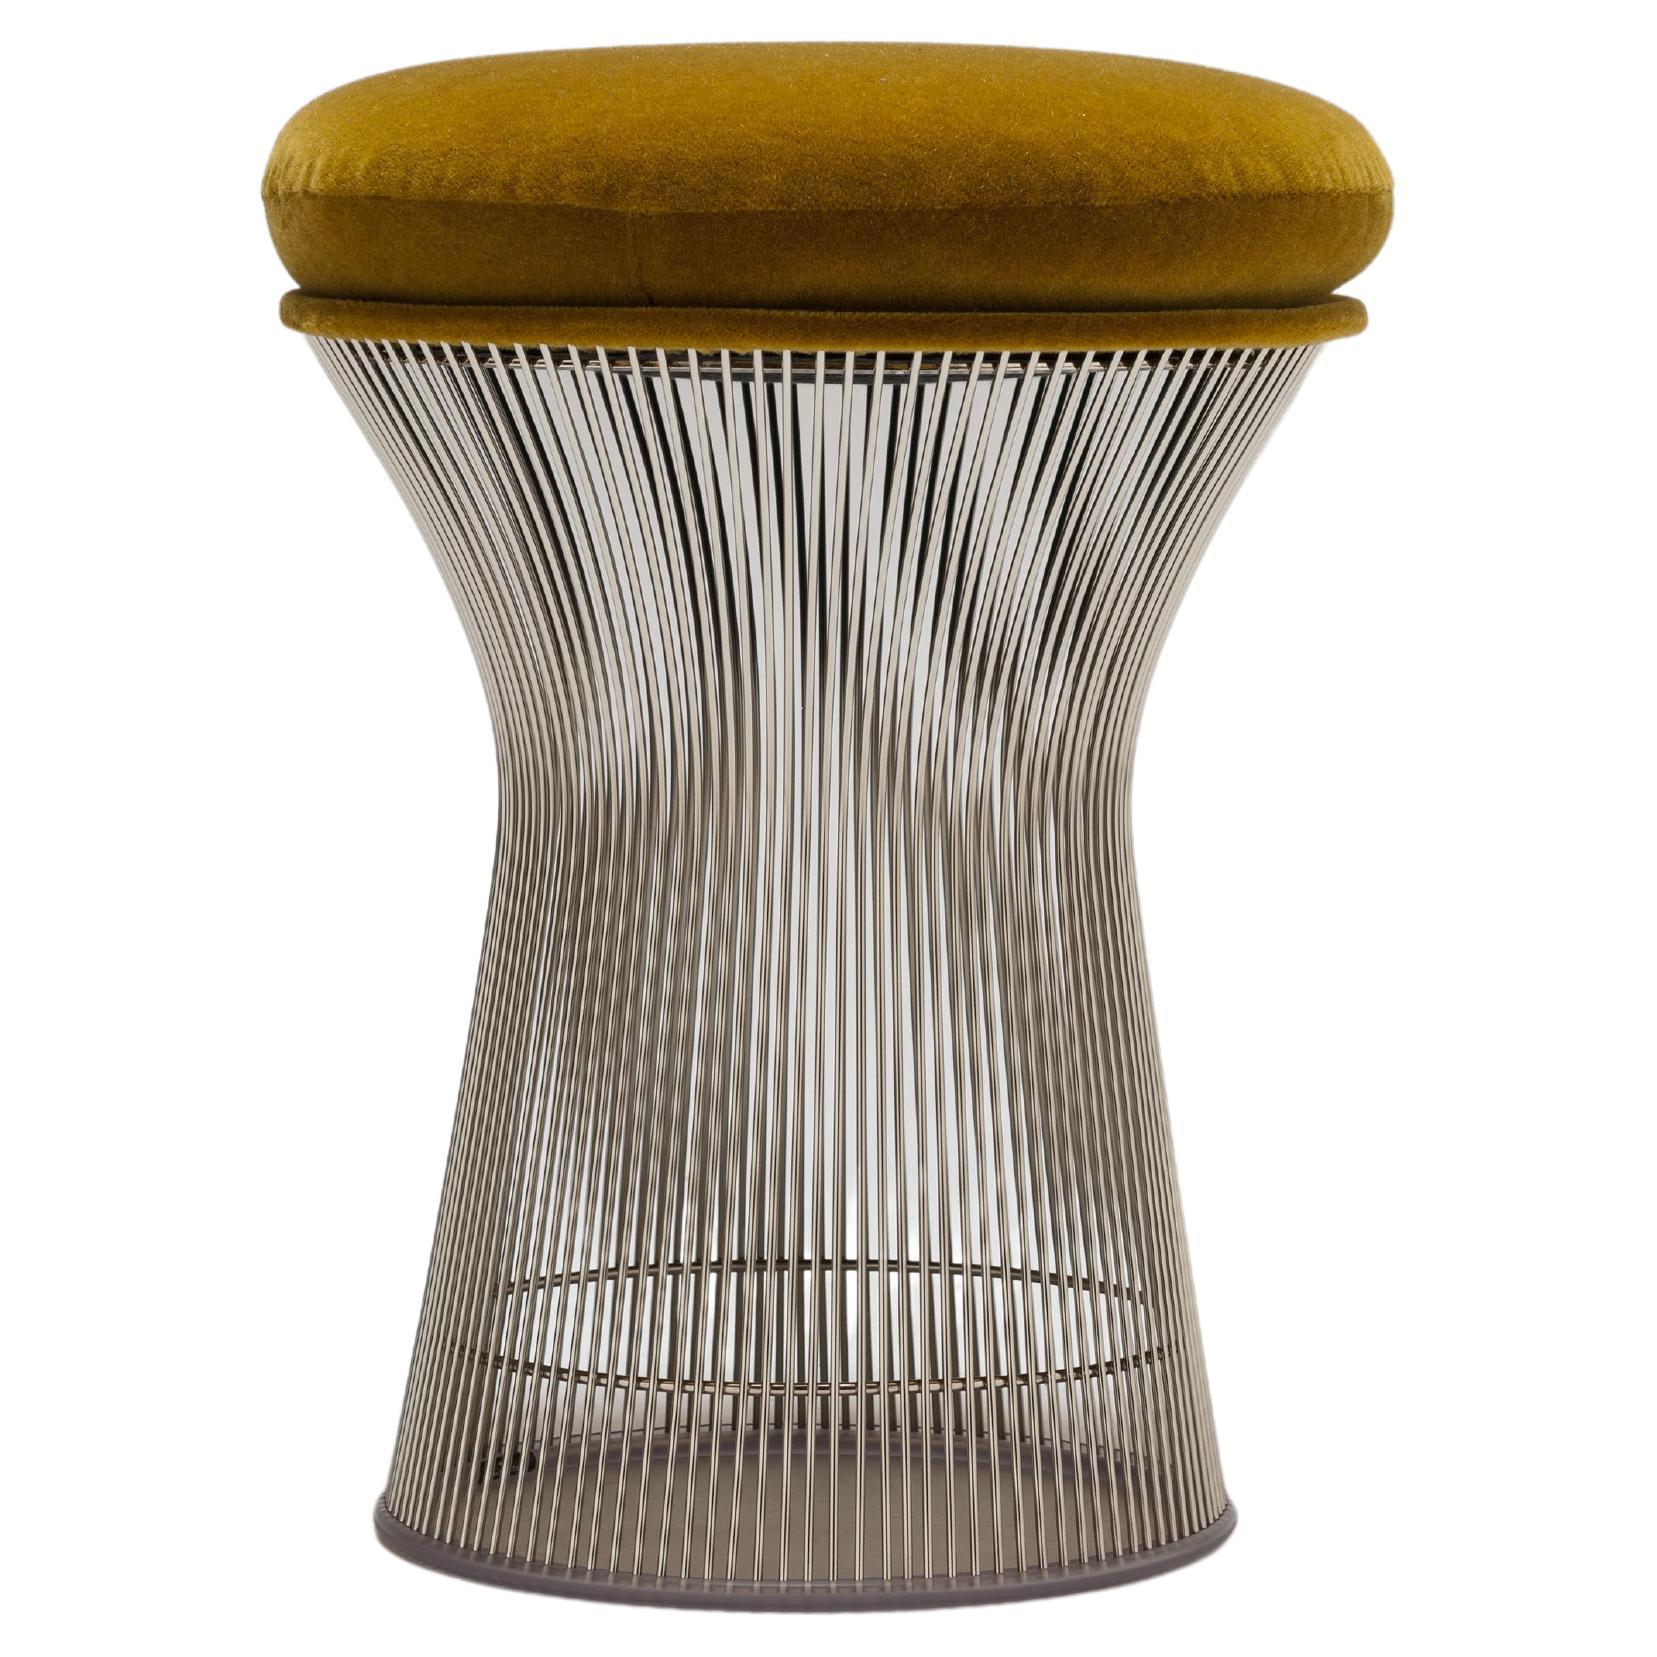 Chartreuse Green Warren Platner Stool by Knoll For Sale